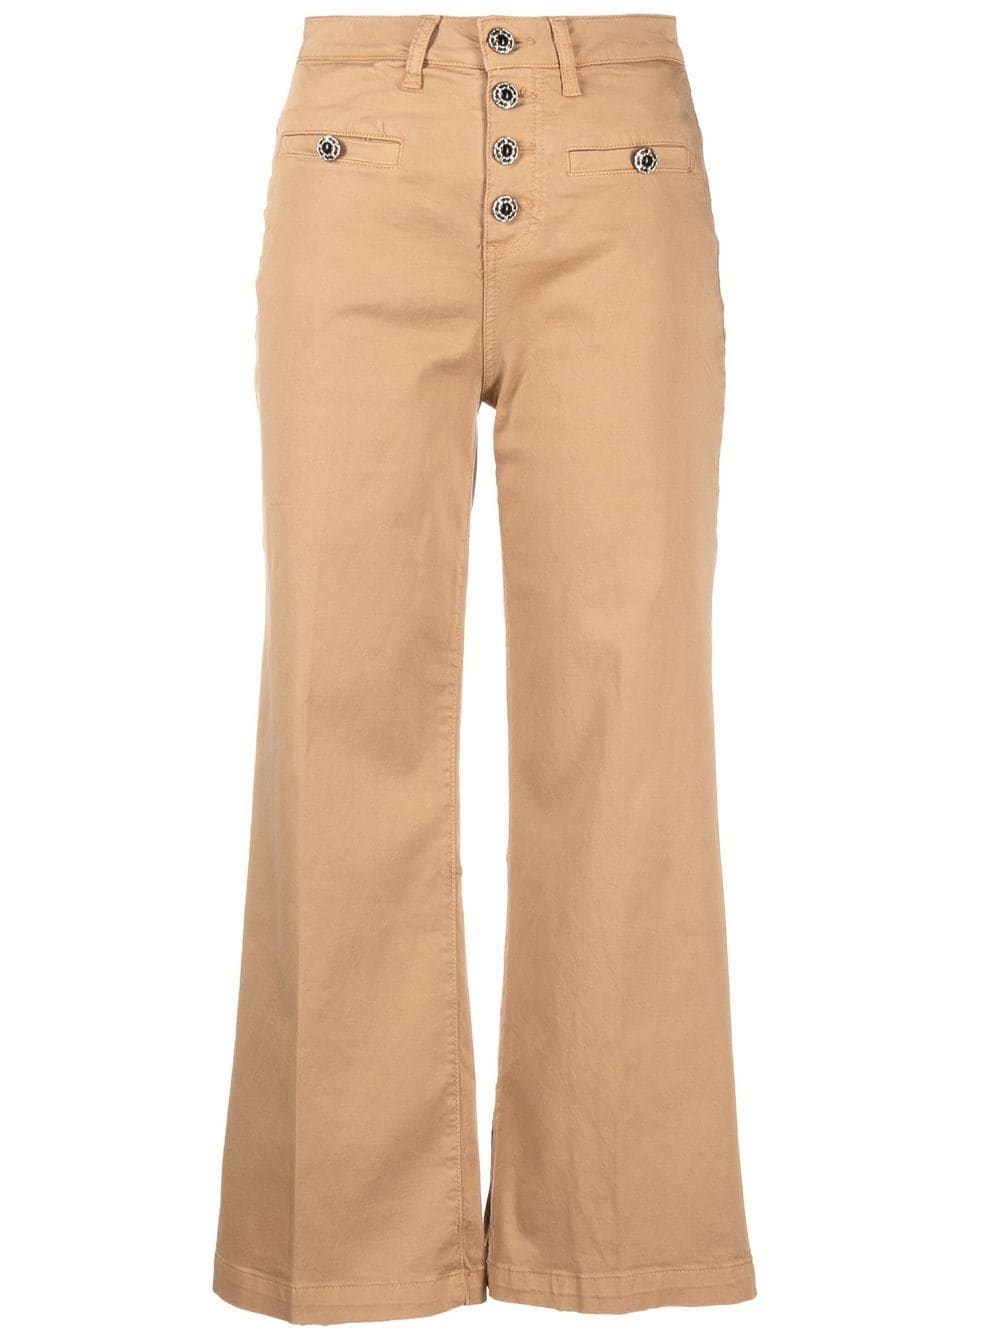 LIU JO high-waisted cropped trousers - Brown